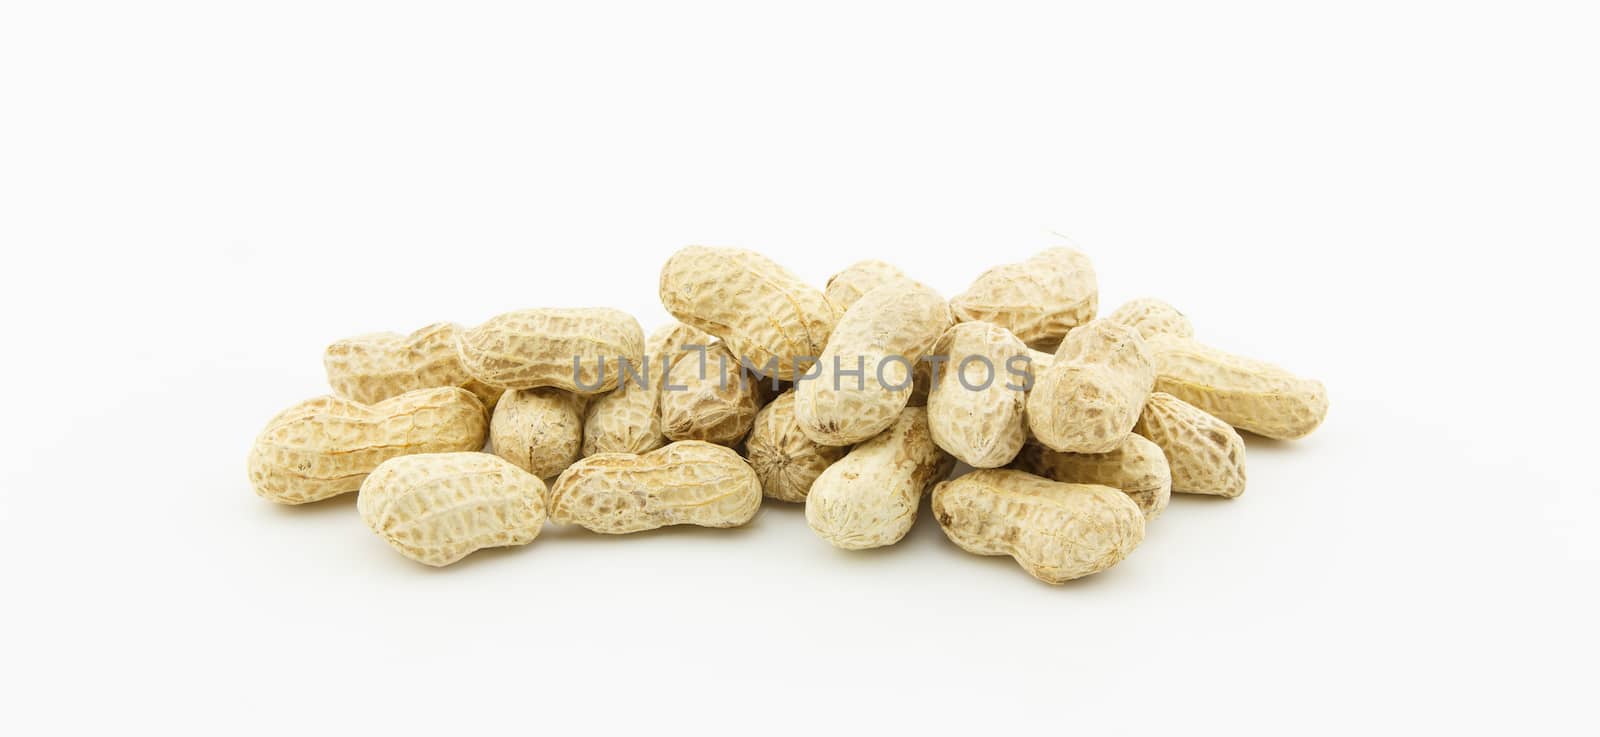 Dried peanuts on white background by vitawin